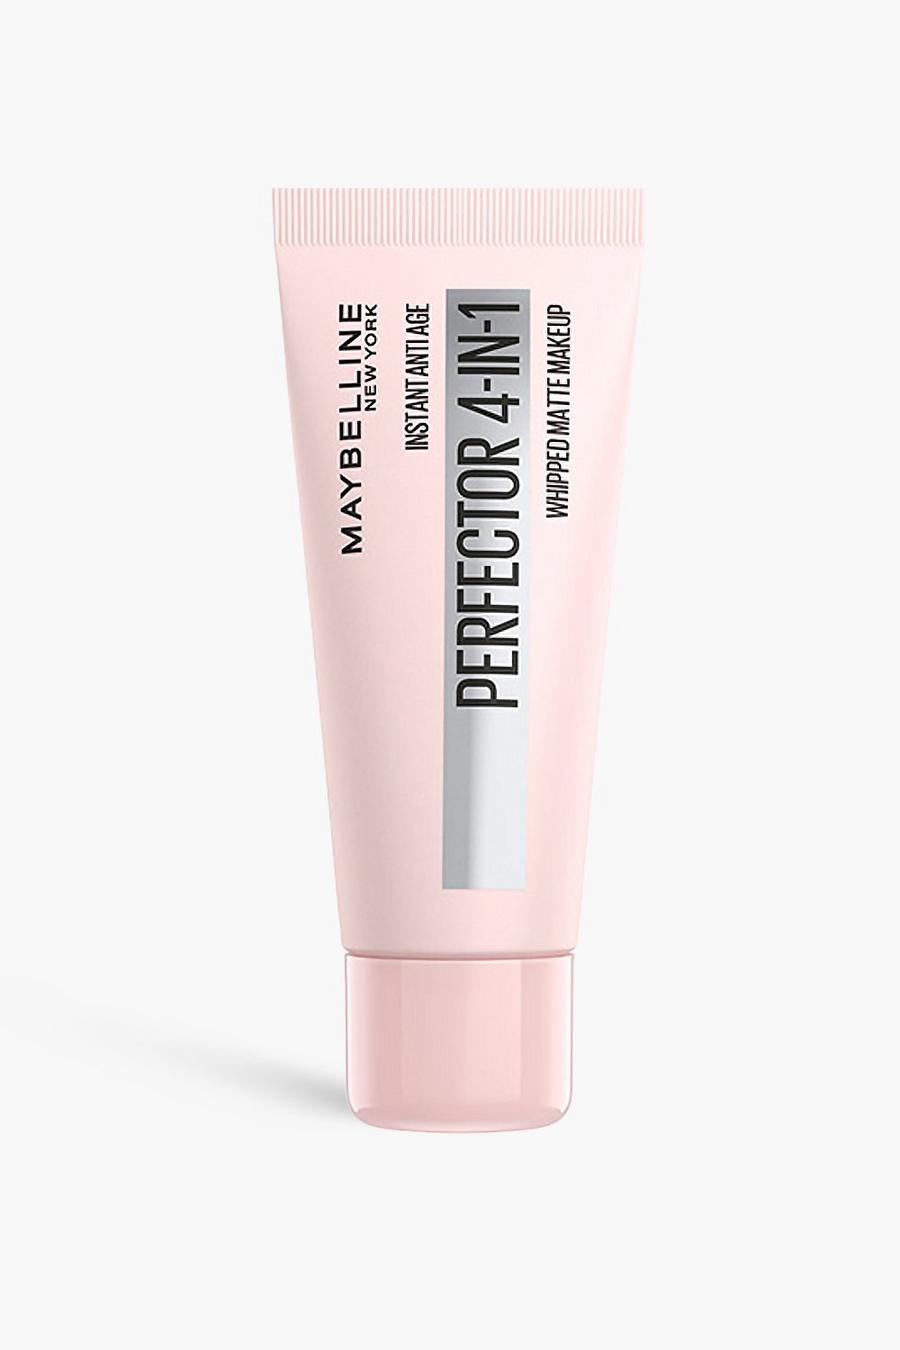 Medium light neutral Maybelline Instant Age Rewind Instant Perfector 4 in 1